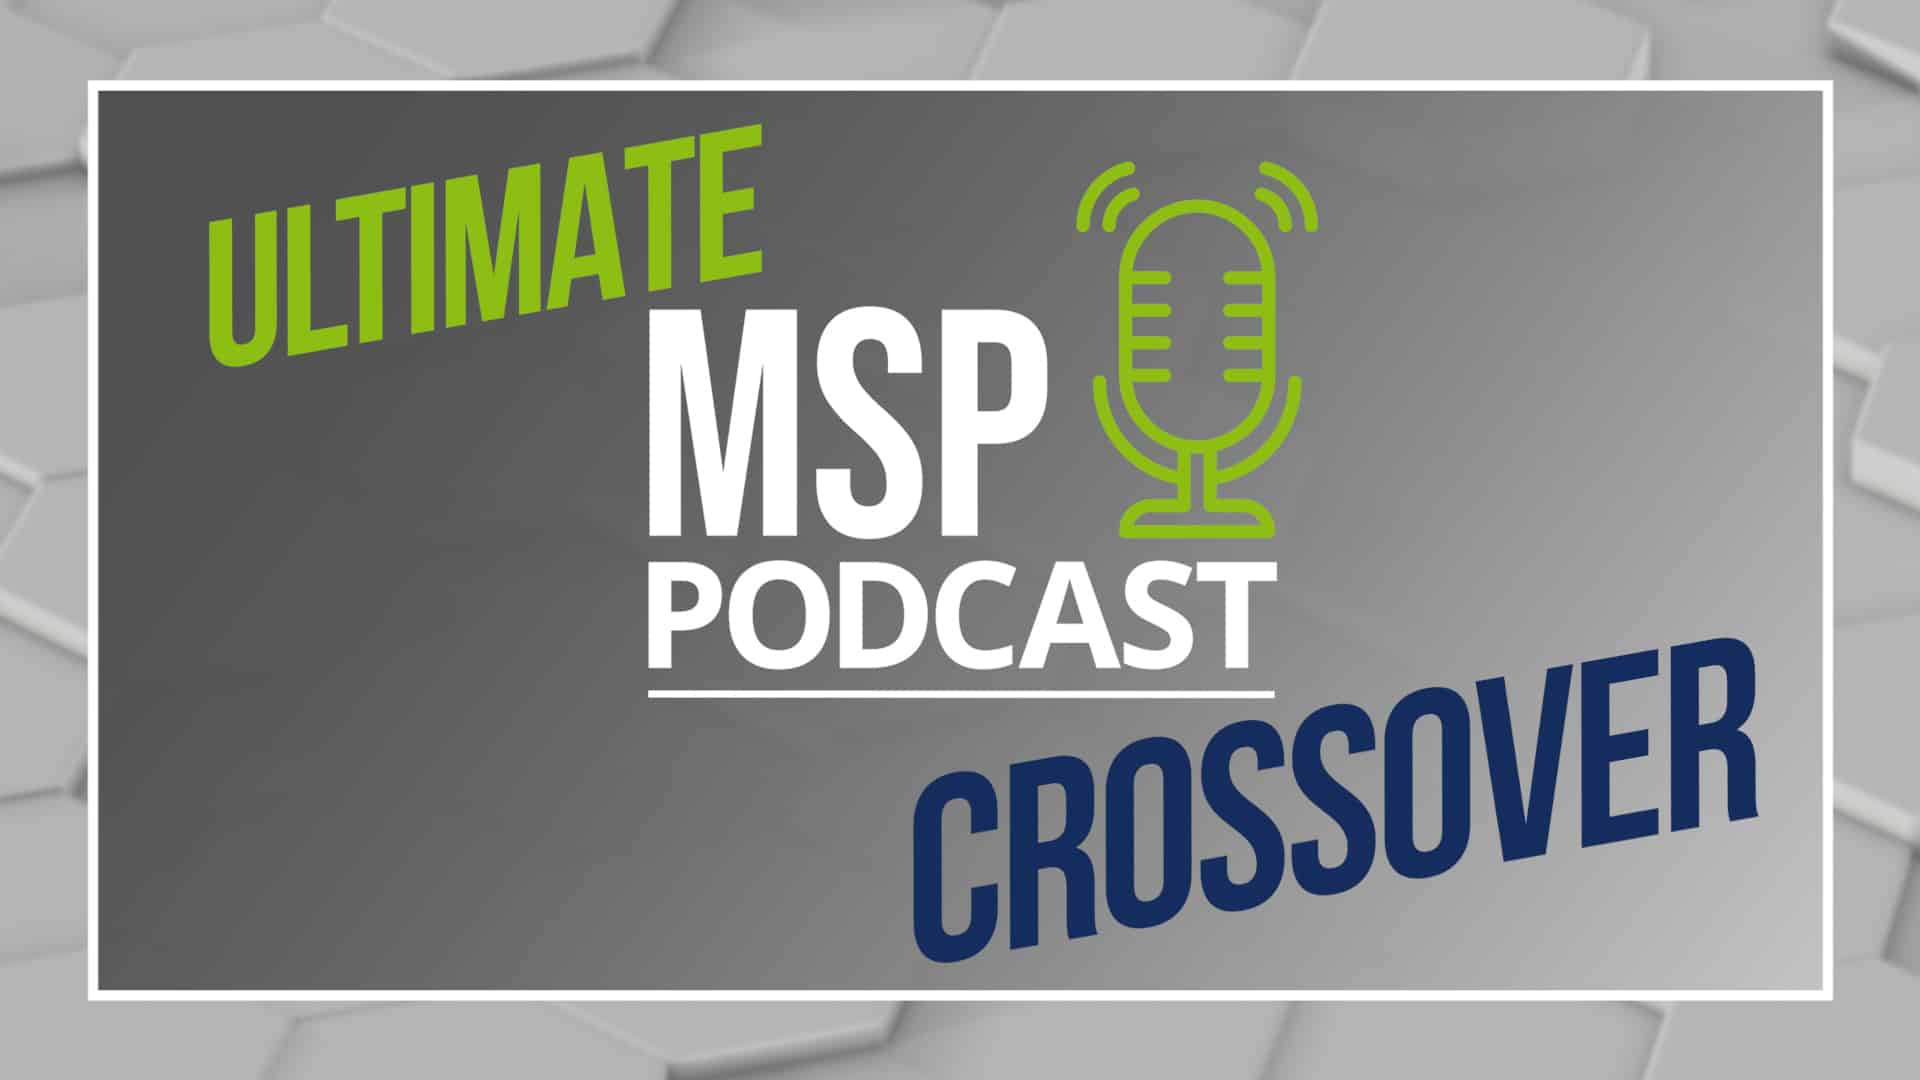 The Ultimate MSP Podcast Crossover image